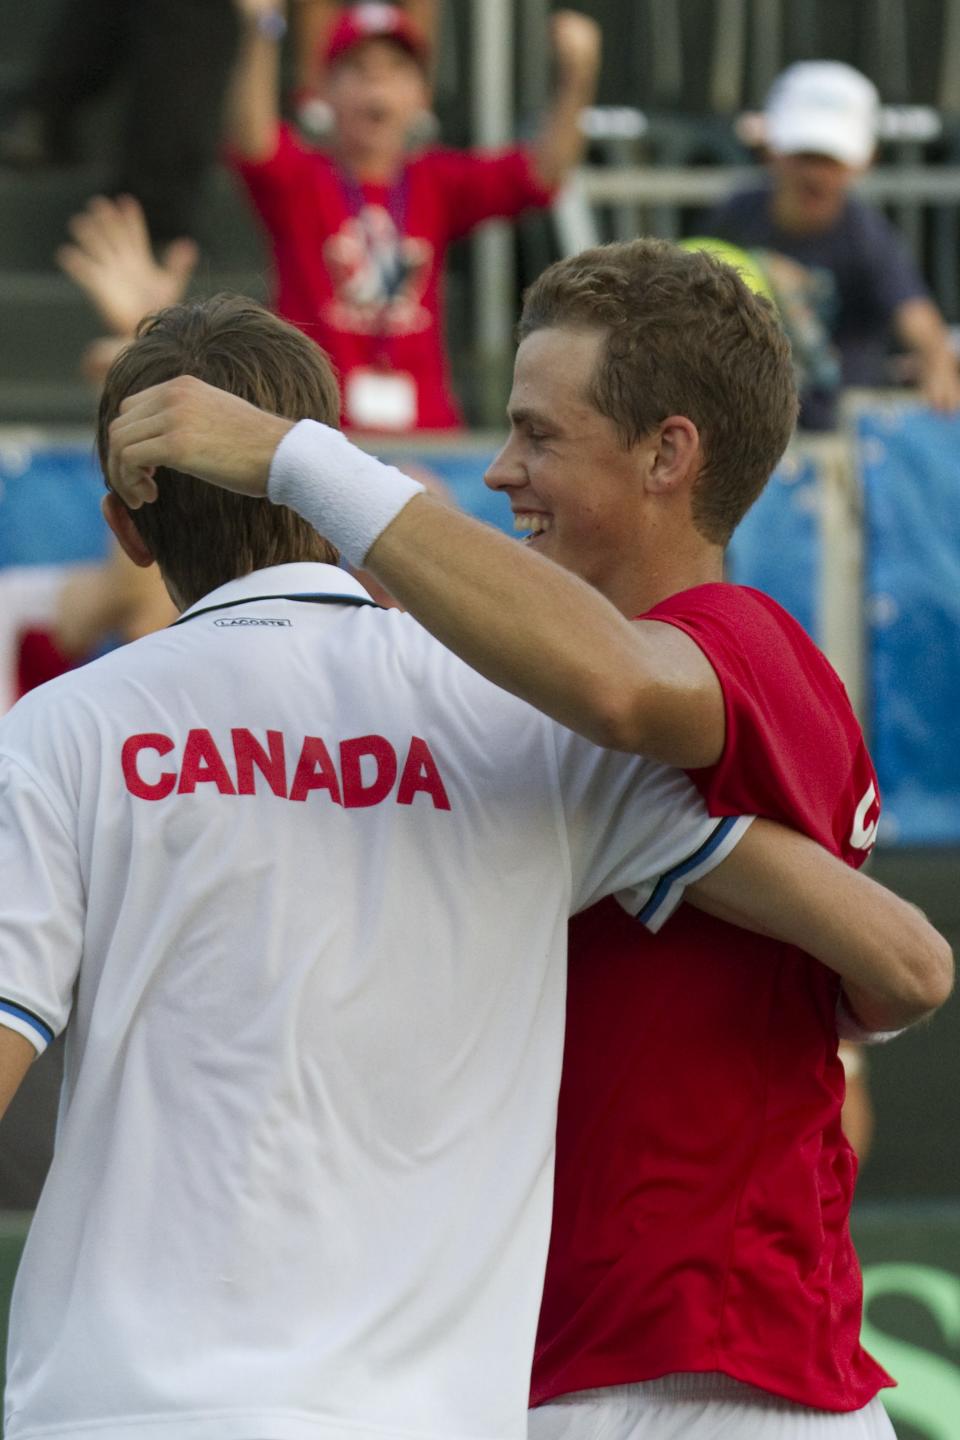 Canadian tennis players Vasek Pospisil and Daniel Nestor (L) react after win the game against Israeli tennis team players Jonathan Erlich and Andy Ram during their Davis Cup world group doubles playoff tennis match in Ramat Hasharon near Tel Aviv on September 17, 2011. Canadian team won 6-4 3-6 4-6 4-6  againts Israel.  AFP PHOTO/JACK GUEZ (Photo credit should read JACK GUEZ/AFP/Getty Images)